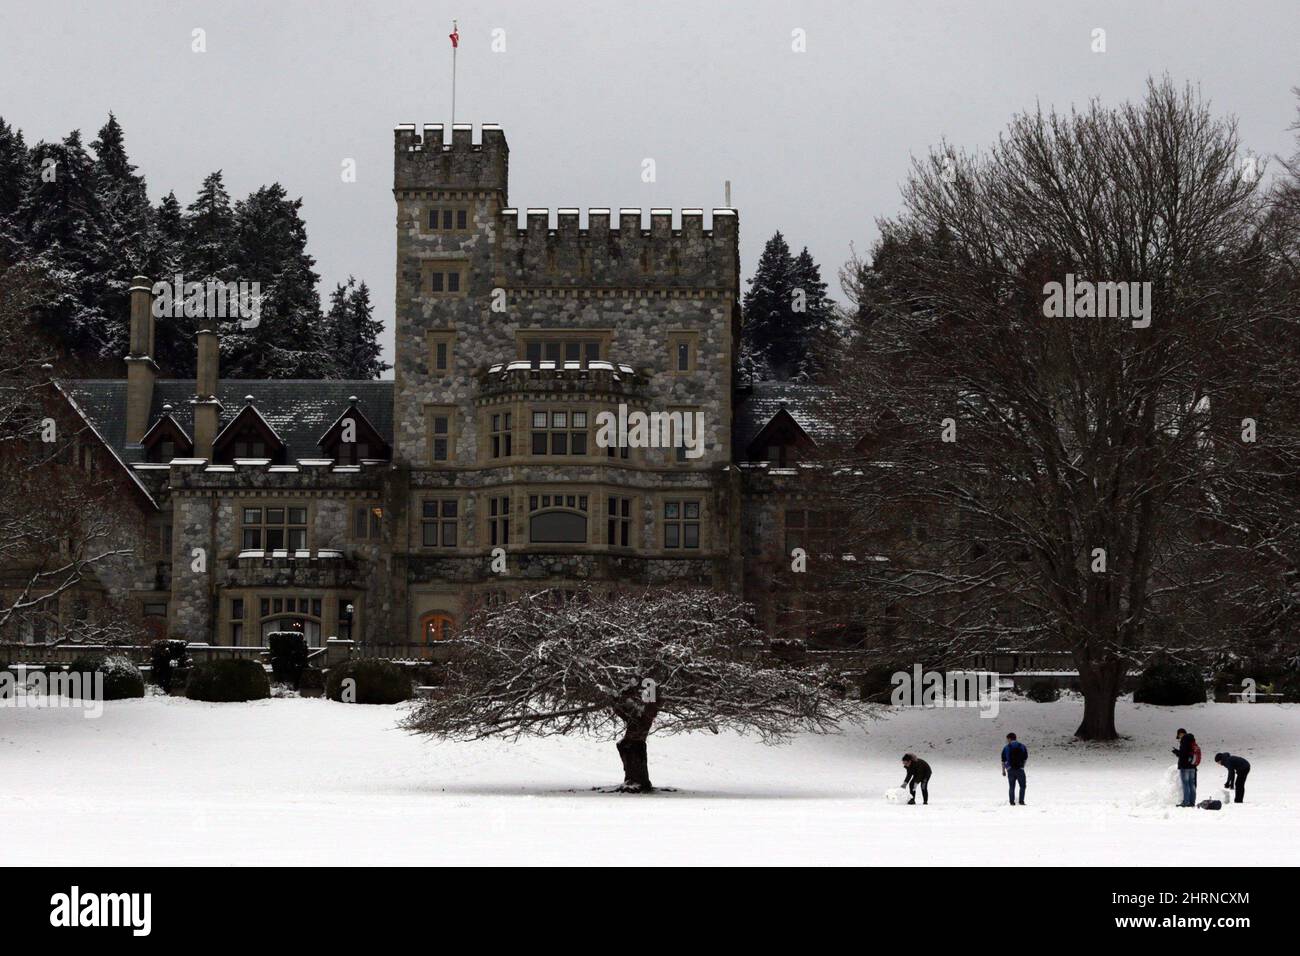 People make a snowman at Royal Roads University following snowfall in Victoria, B.C., Friday, December 9, 2016. The COVID-19 pandemic has placed the world at a tipping point that's challenging social, political, economic and environmental structures, says the director of a new academic research institute at British Columbia's Royal Roads University. THE CANADIAN PRESS/Chad Hipolito Stock Photo